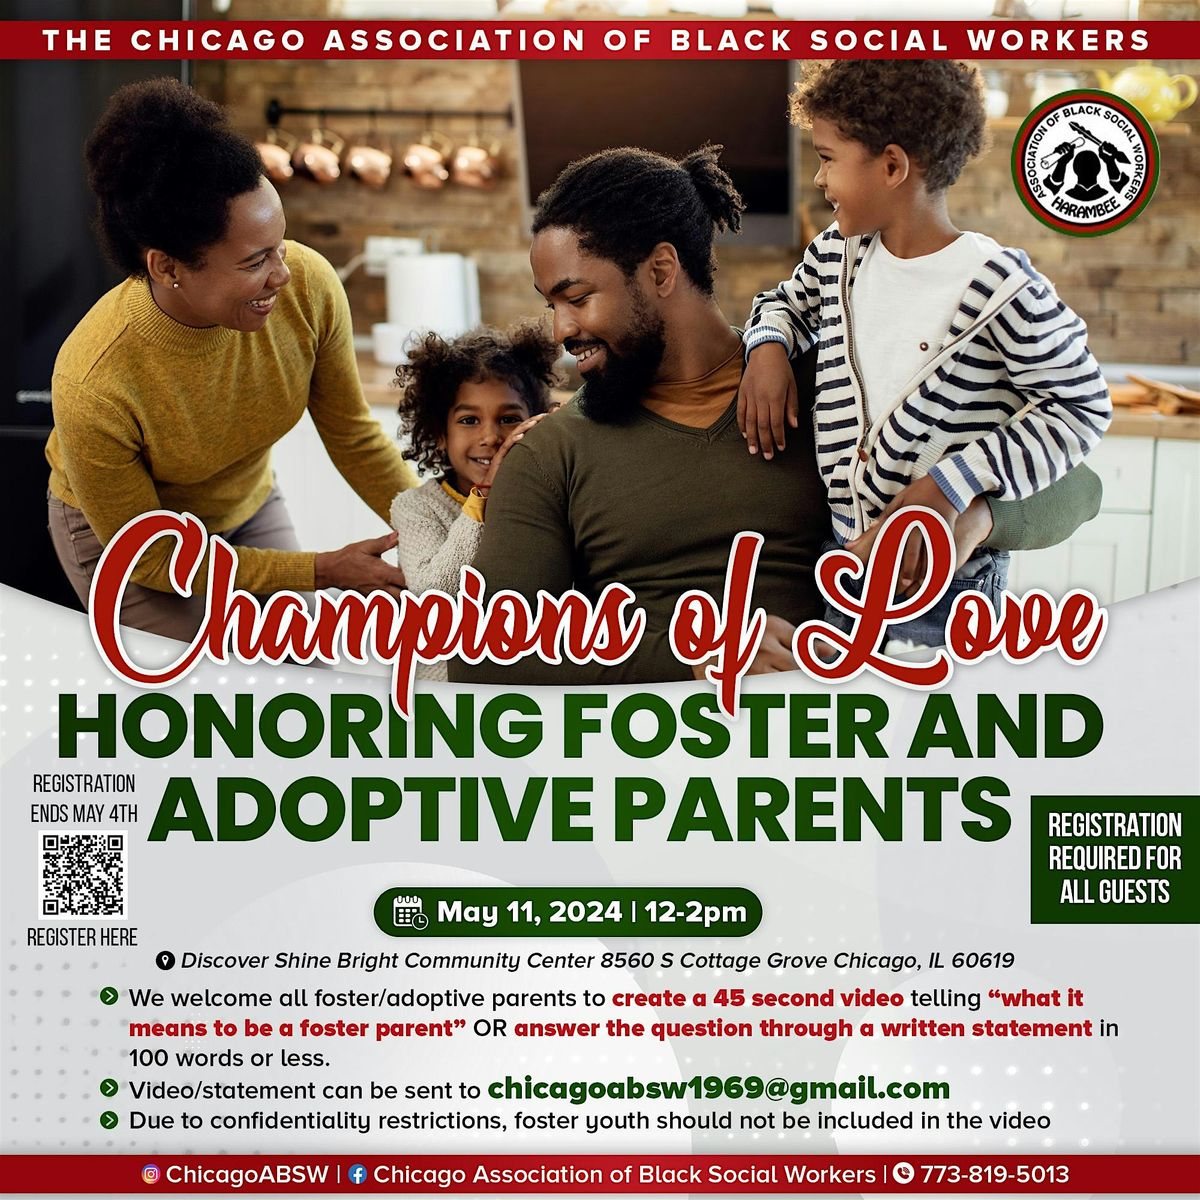 Champions of Love: Honoring Foster and Adoptive Parents